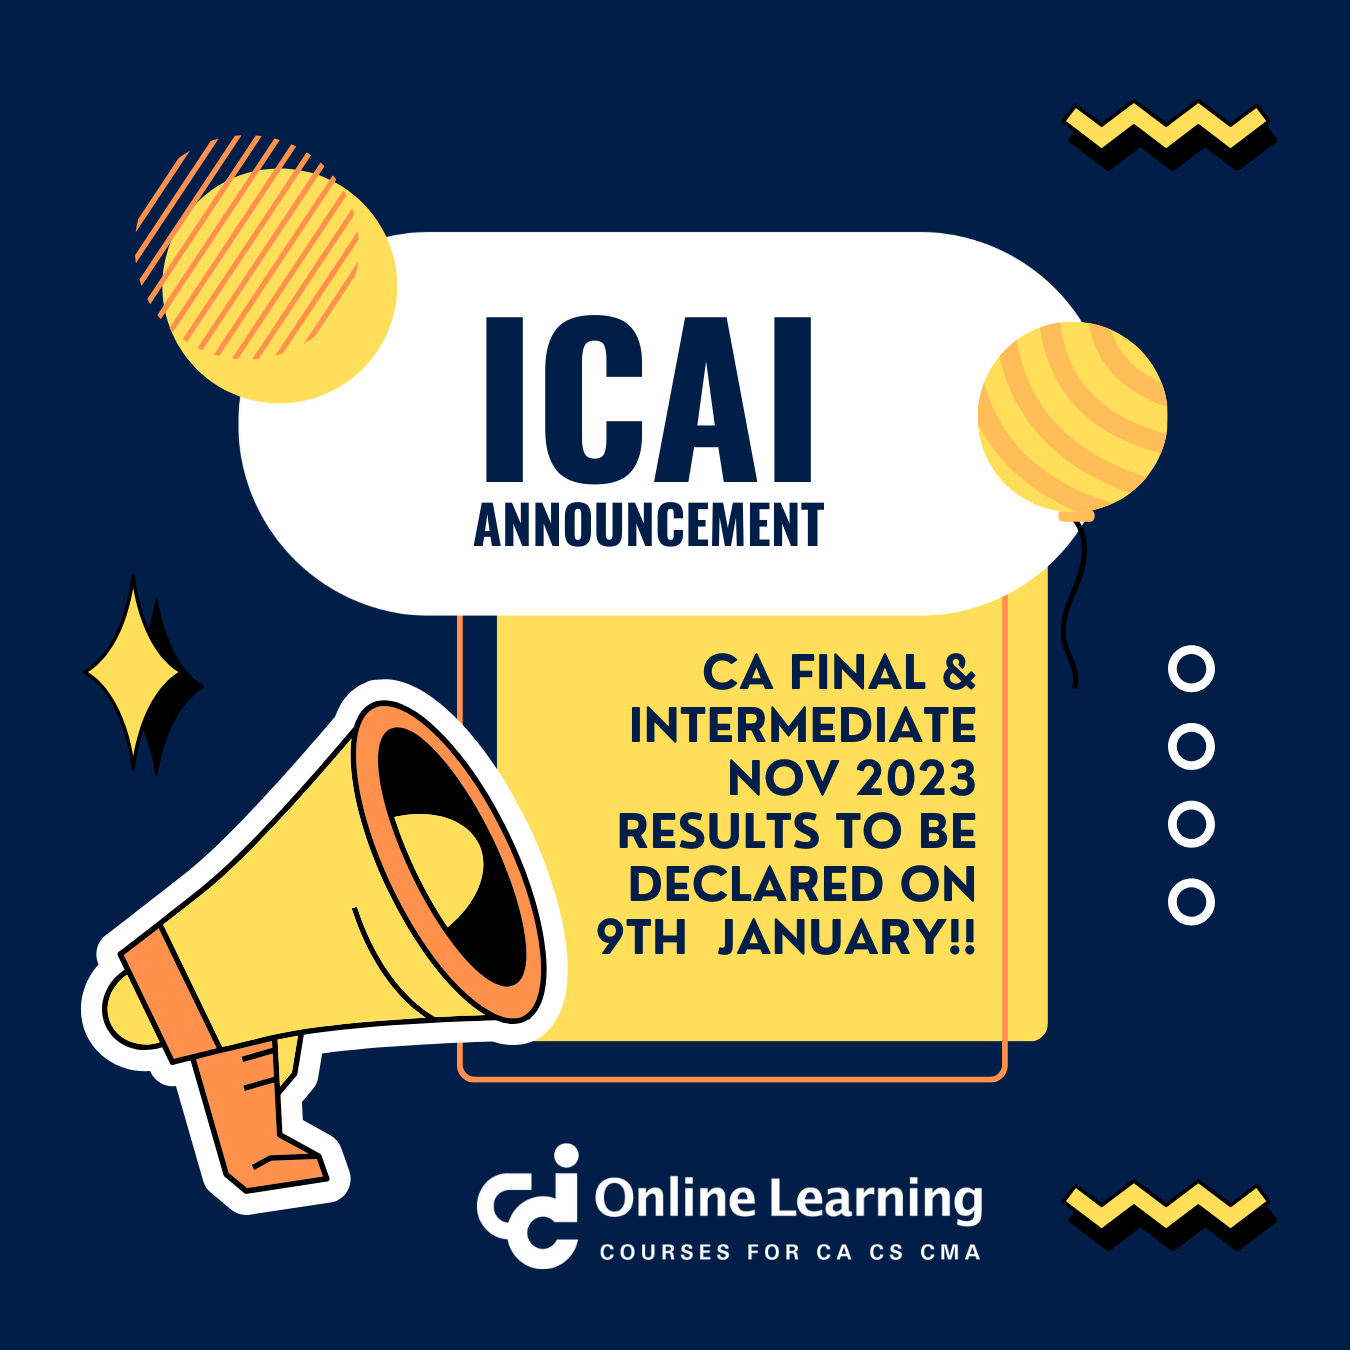 CA Final & Intermediate Nov 2023 Results likely to be declared on 9th January 2024